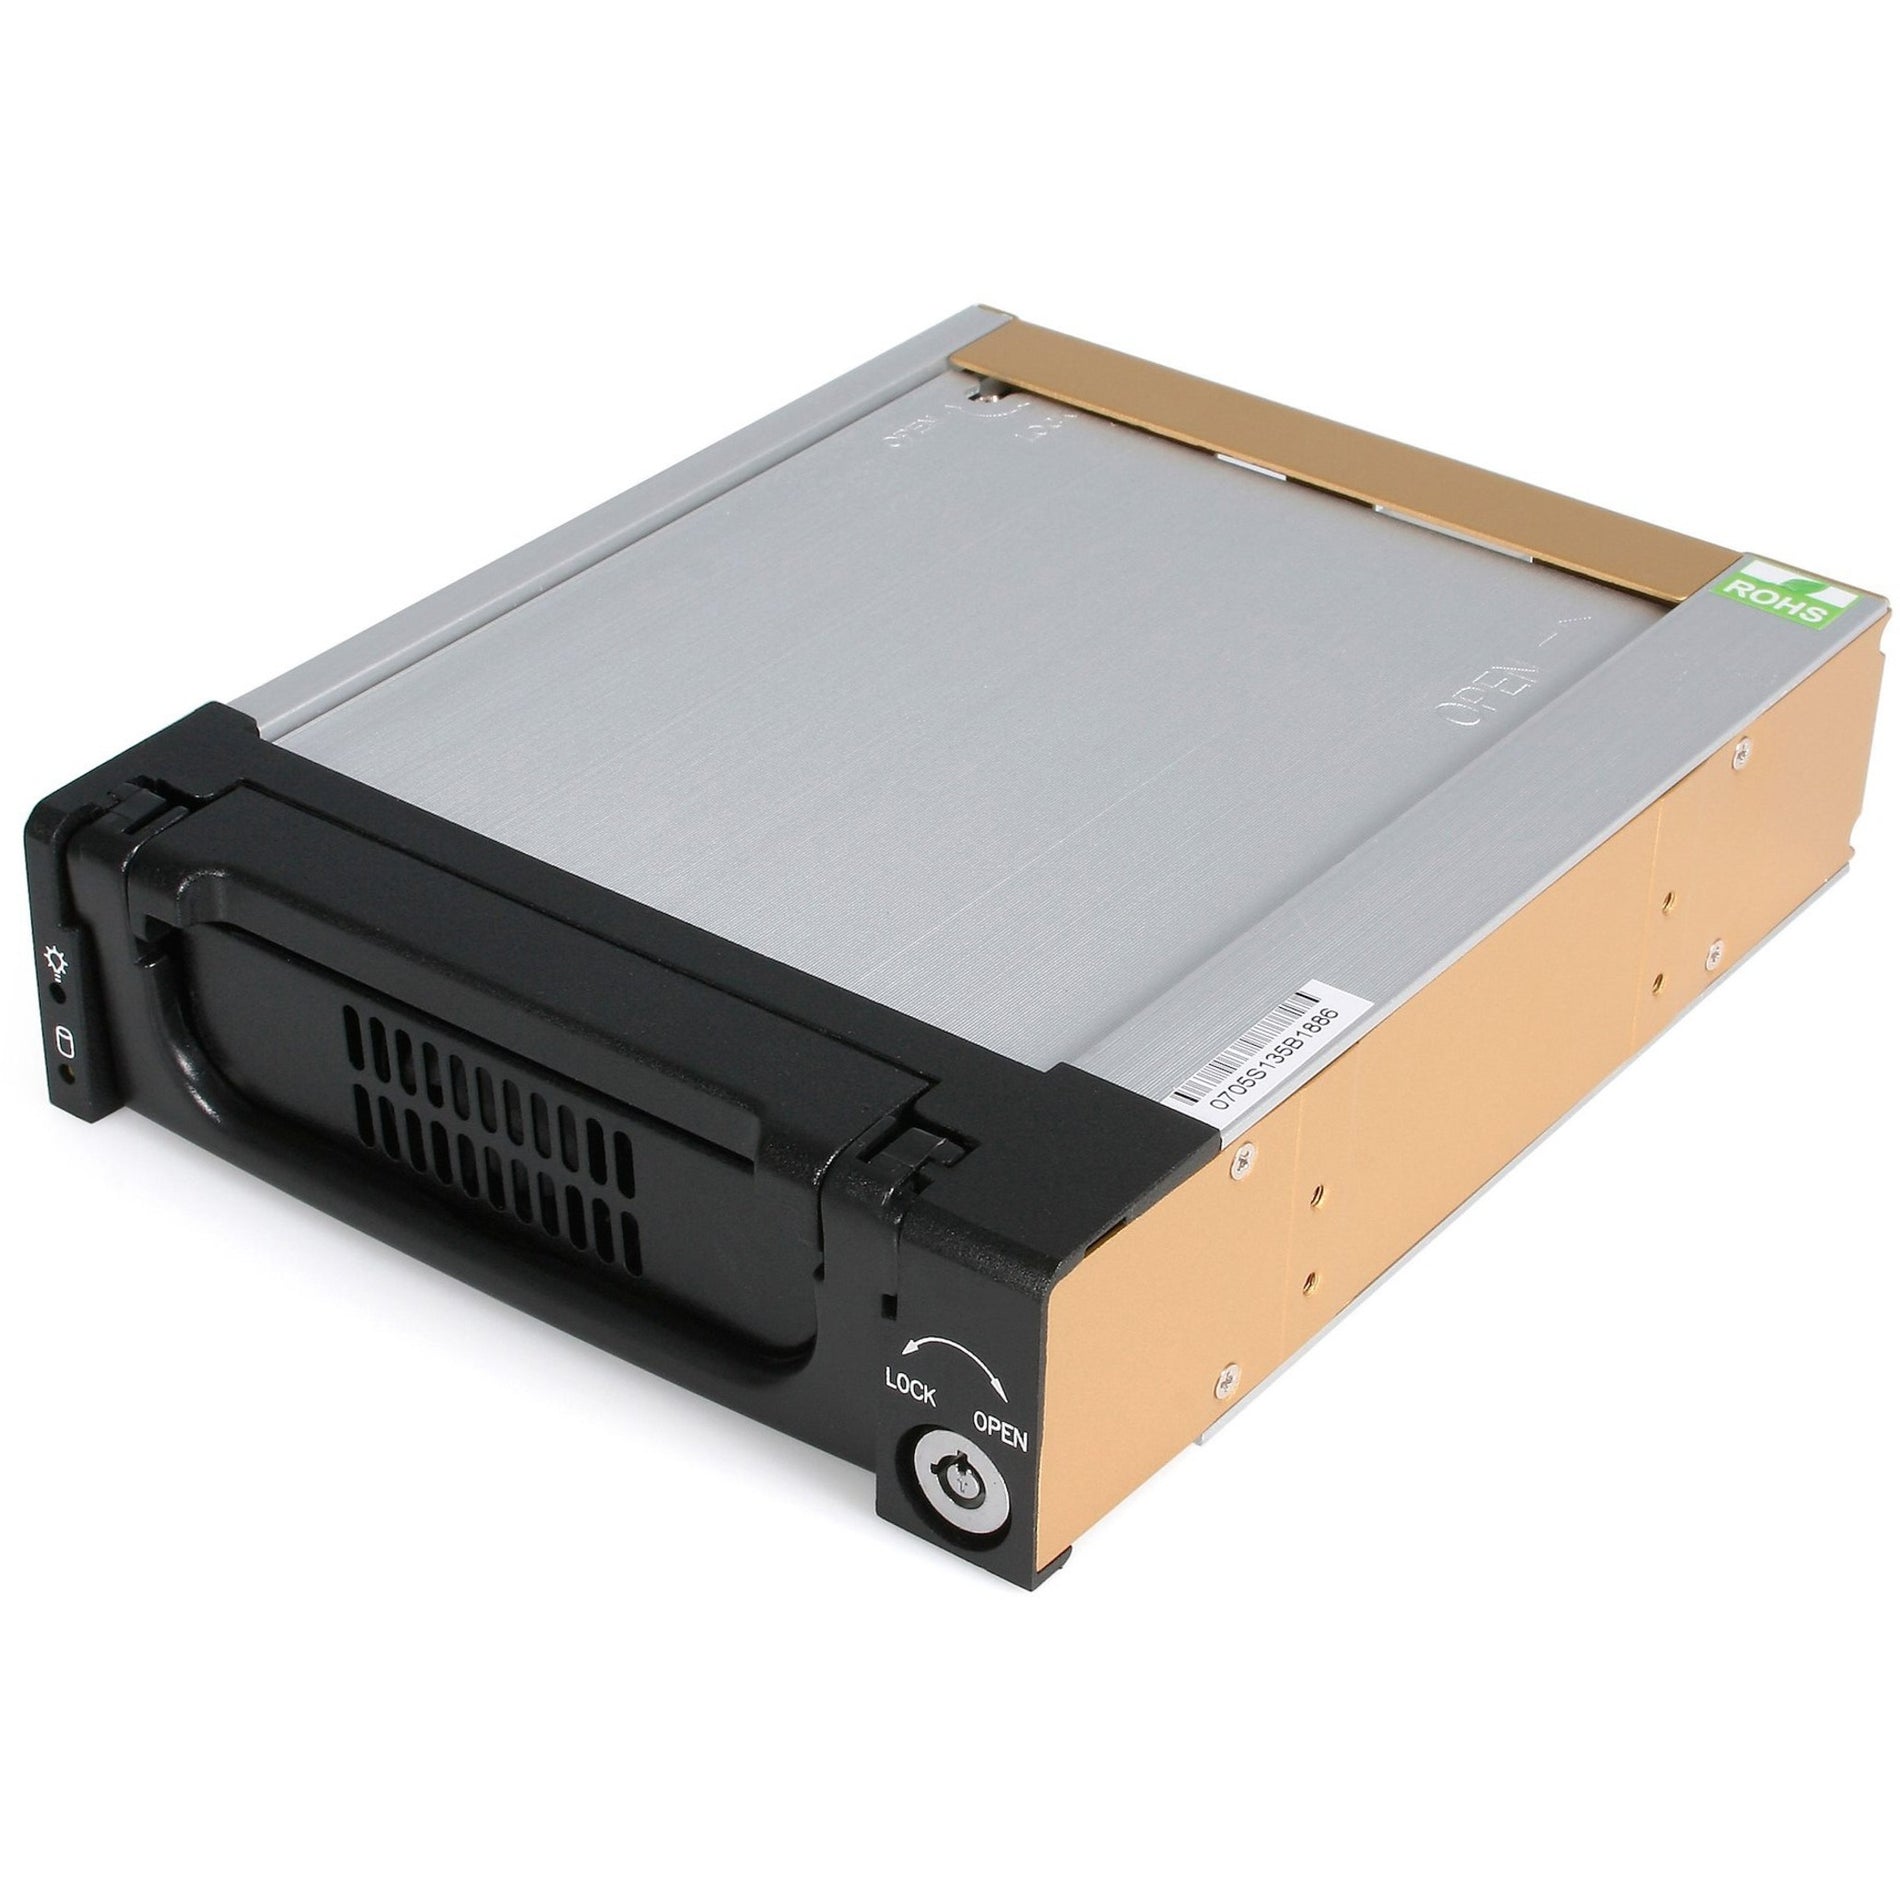 StarTech.com DRW150SATBK 5.25" Rugged SATA HDD Mobile Rack Drawer, Quick and Safe Drive Removal, Aluminum Construction, 2-Year Warranty